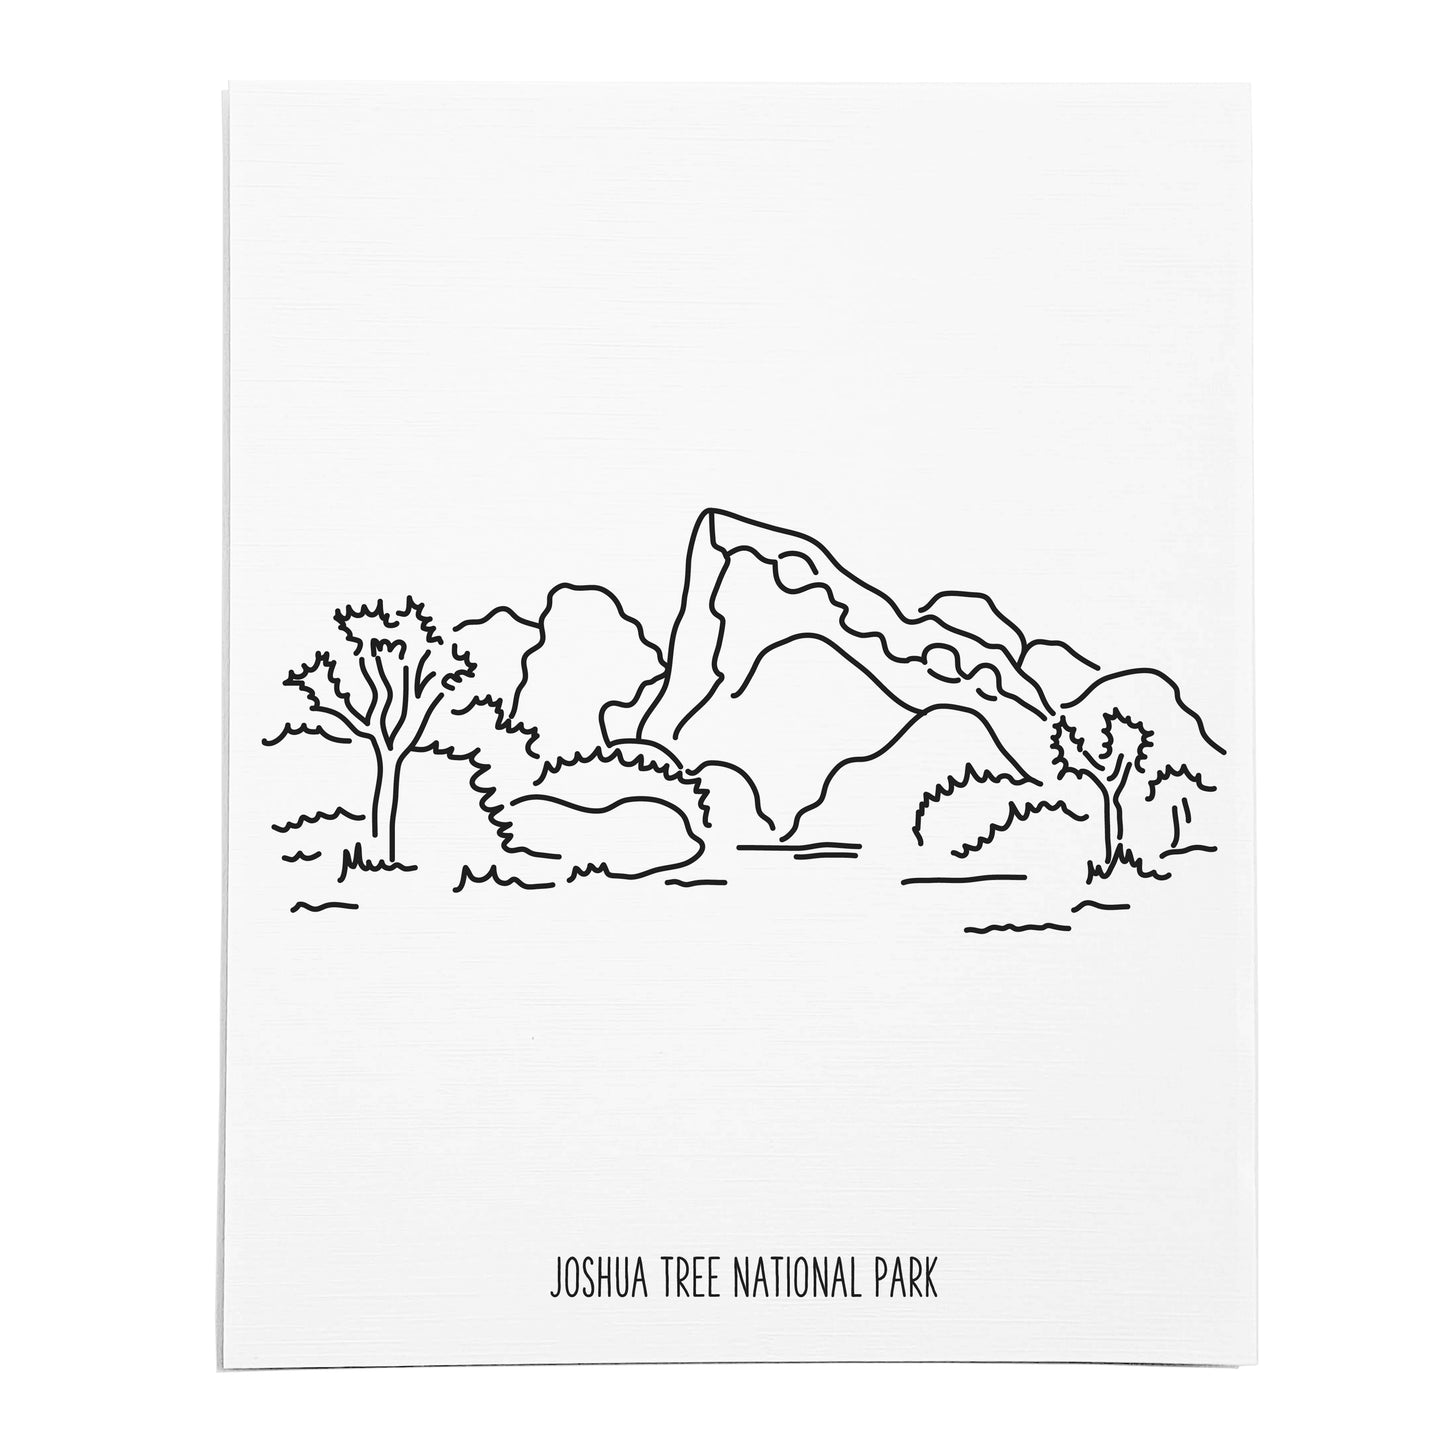 An art print featuring a line drawing of Joshua Tree National Park on white linen paper